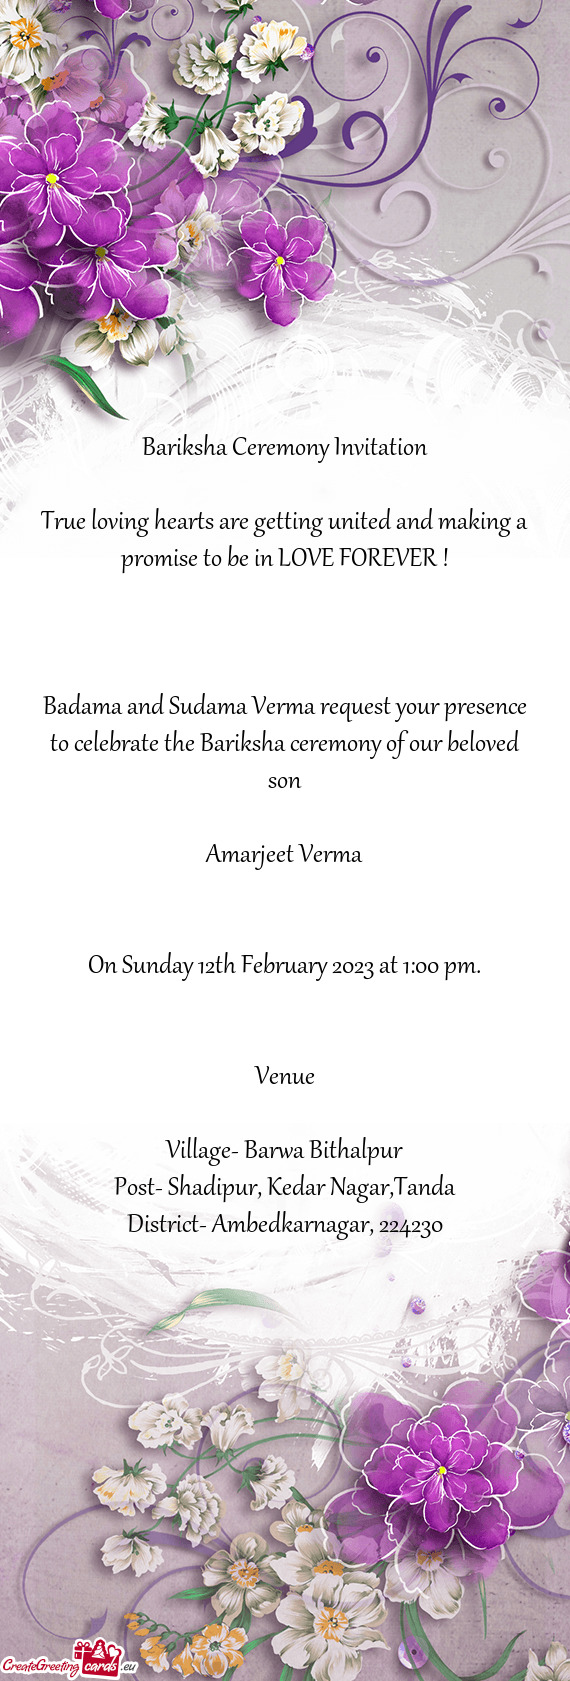 Badama and Sudama Verma request your presence to celebrate the Bariksha ceremony of our beloved son